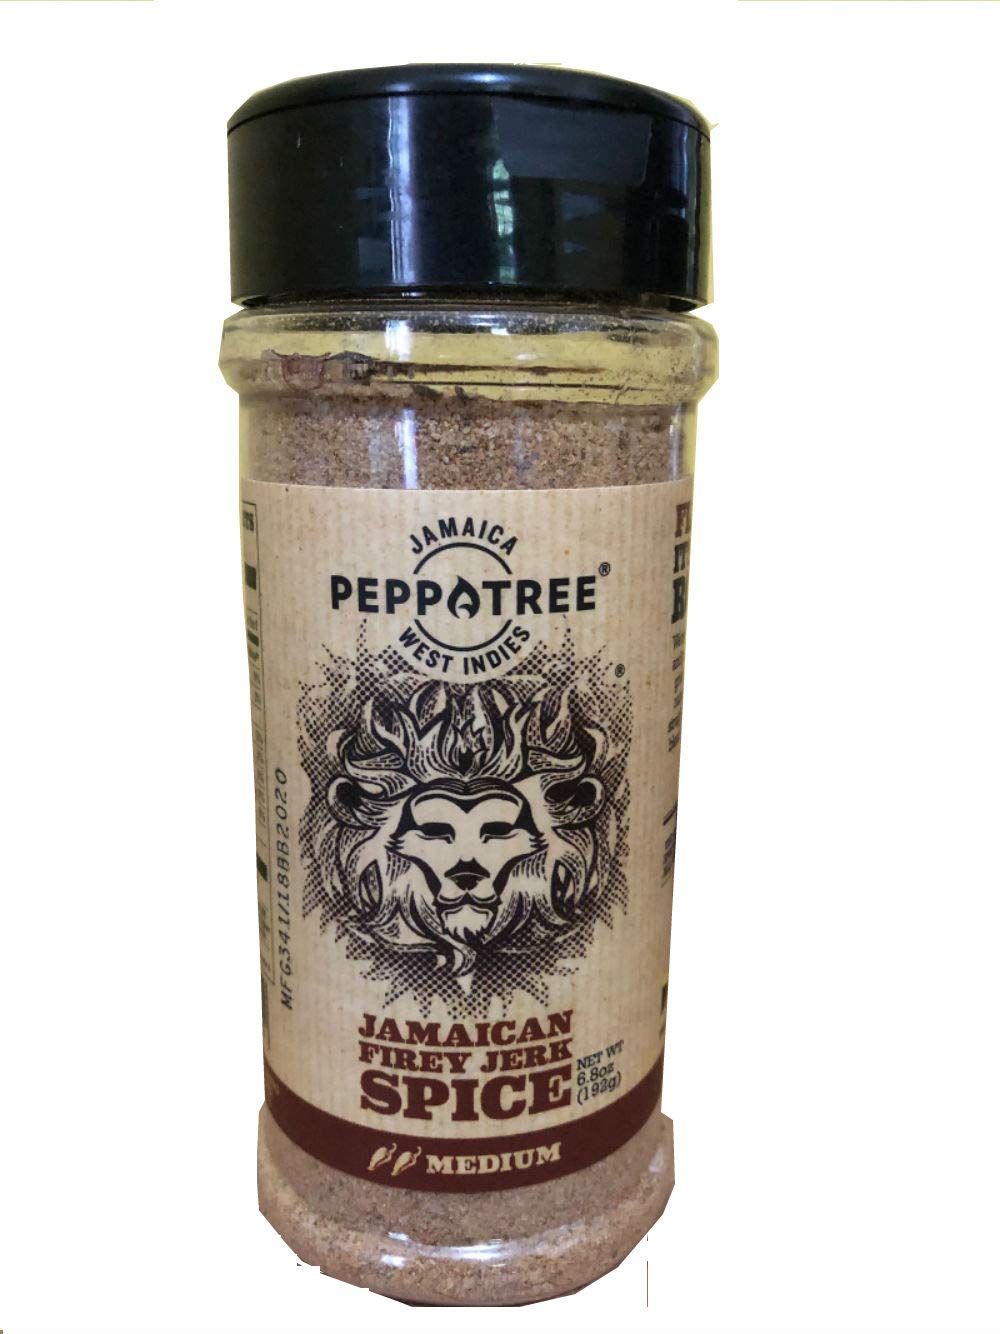 Authentic Jamaican Spices and Seasonings (Firey Jerk)